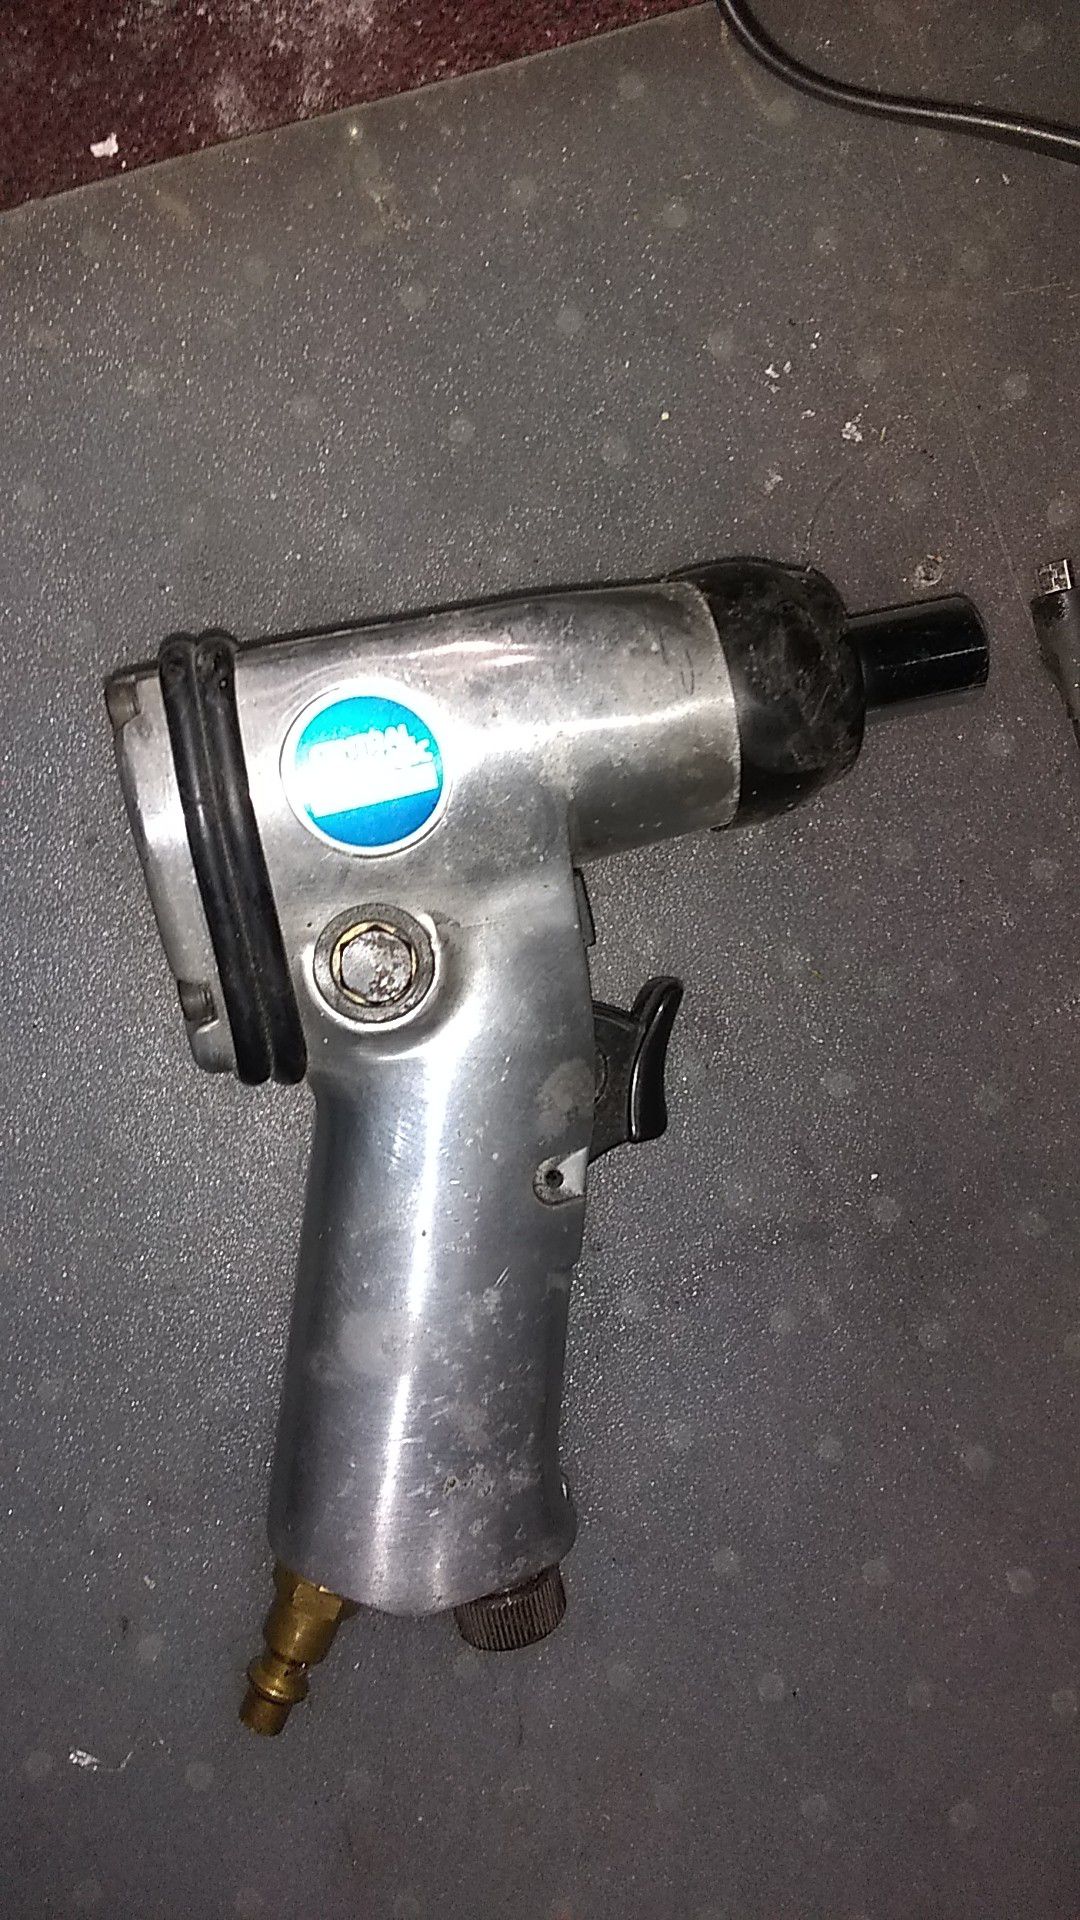 Central pneumatic 3/8 pistol impact wrench